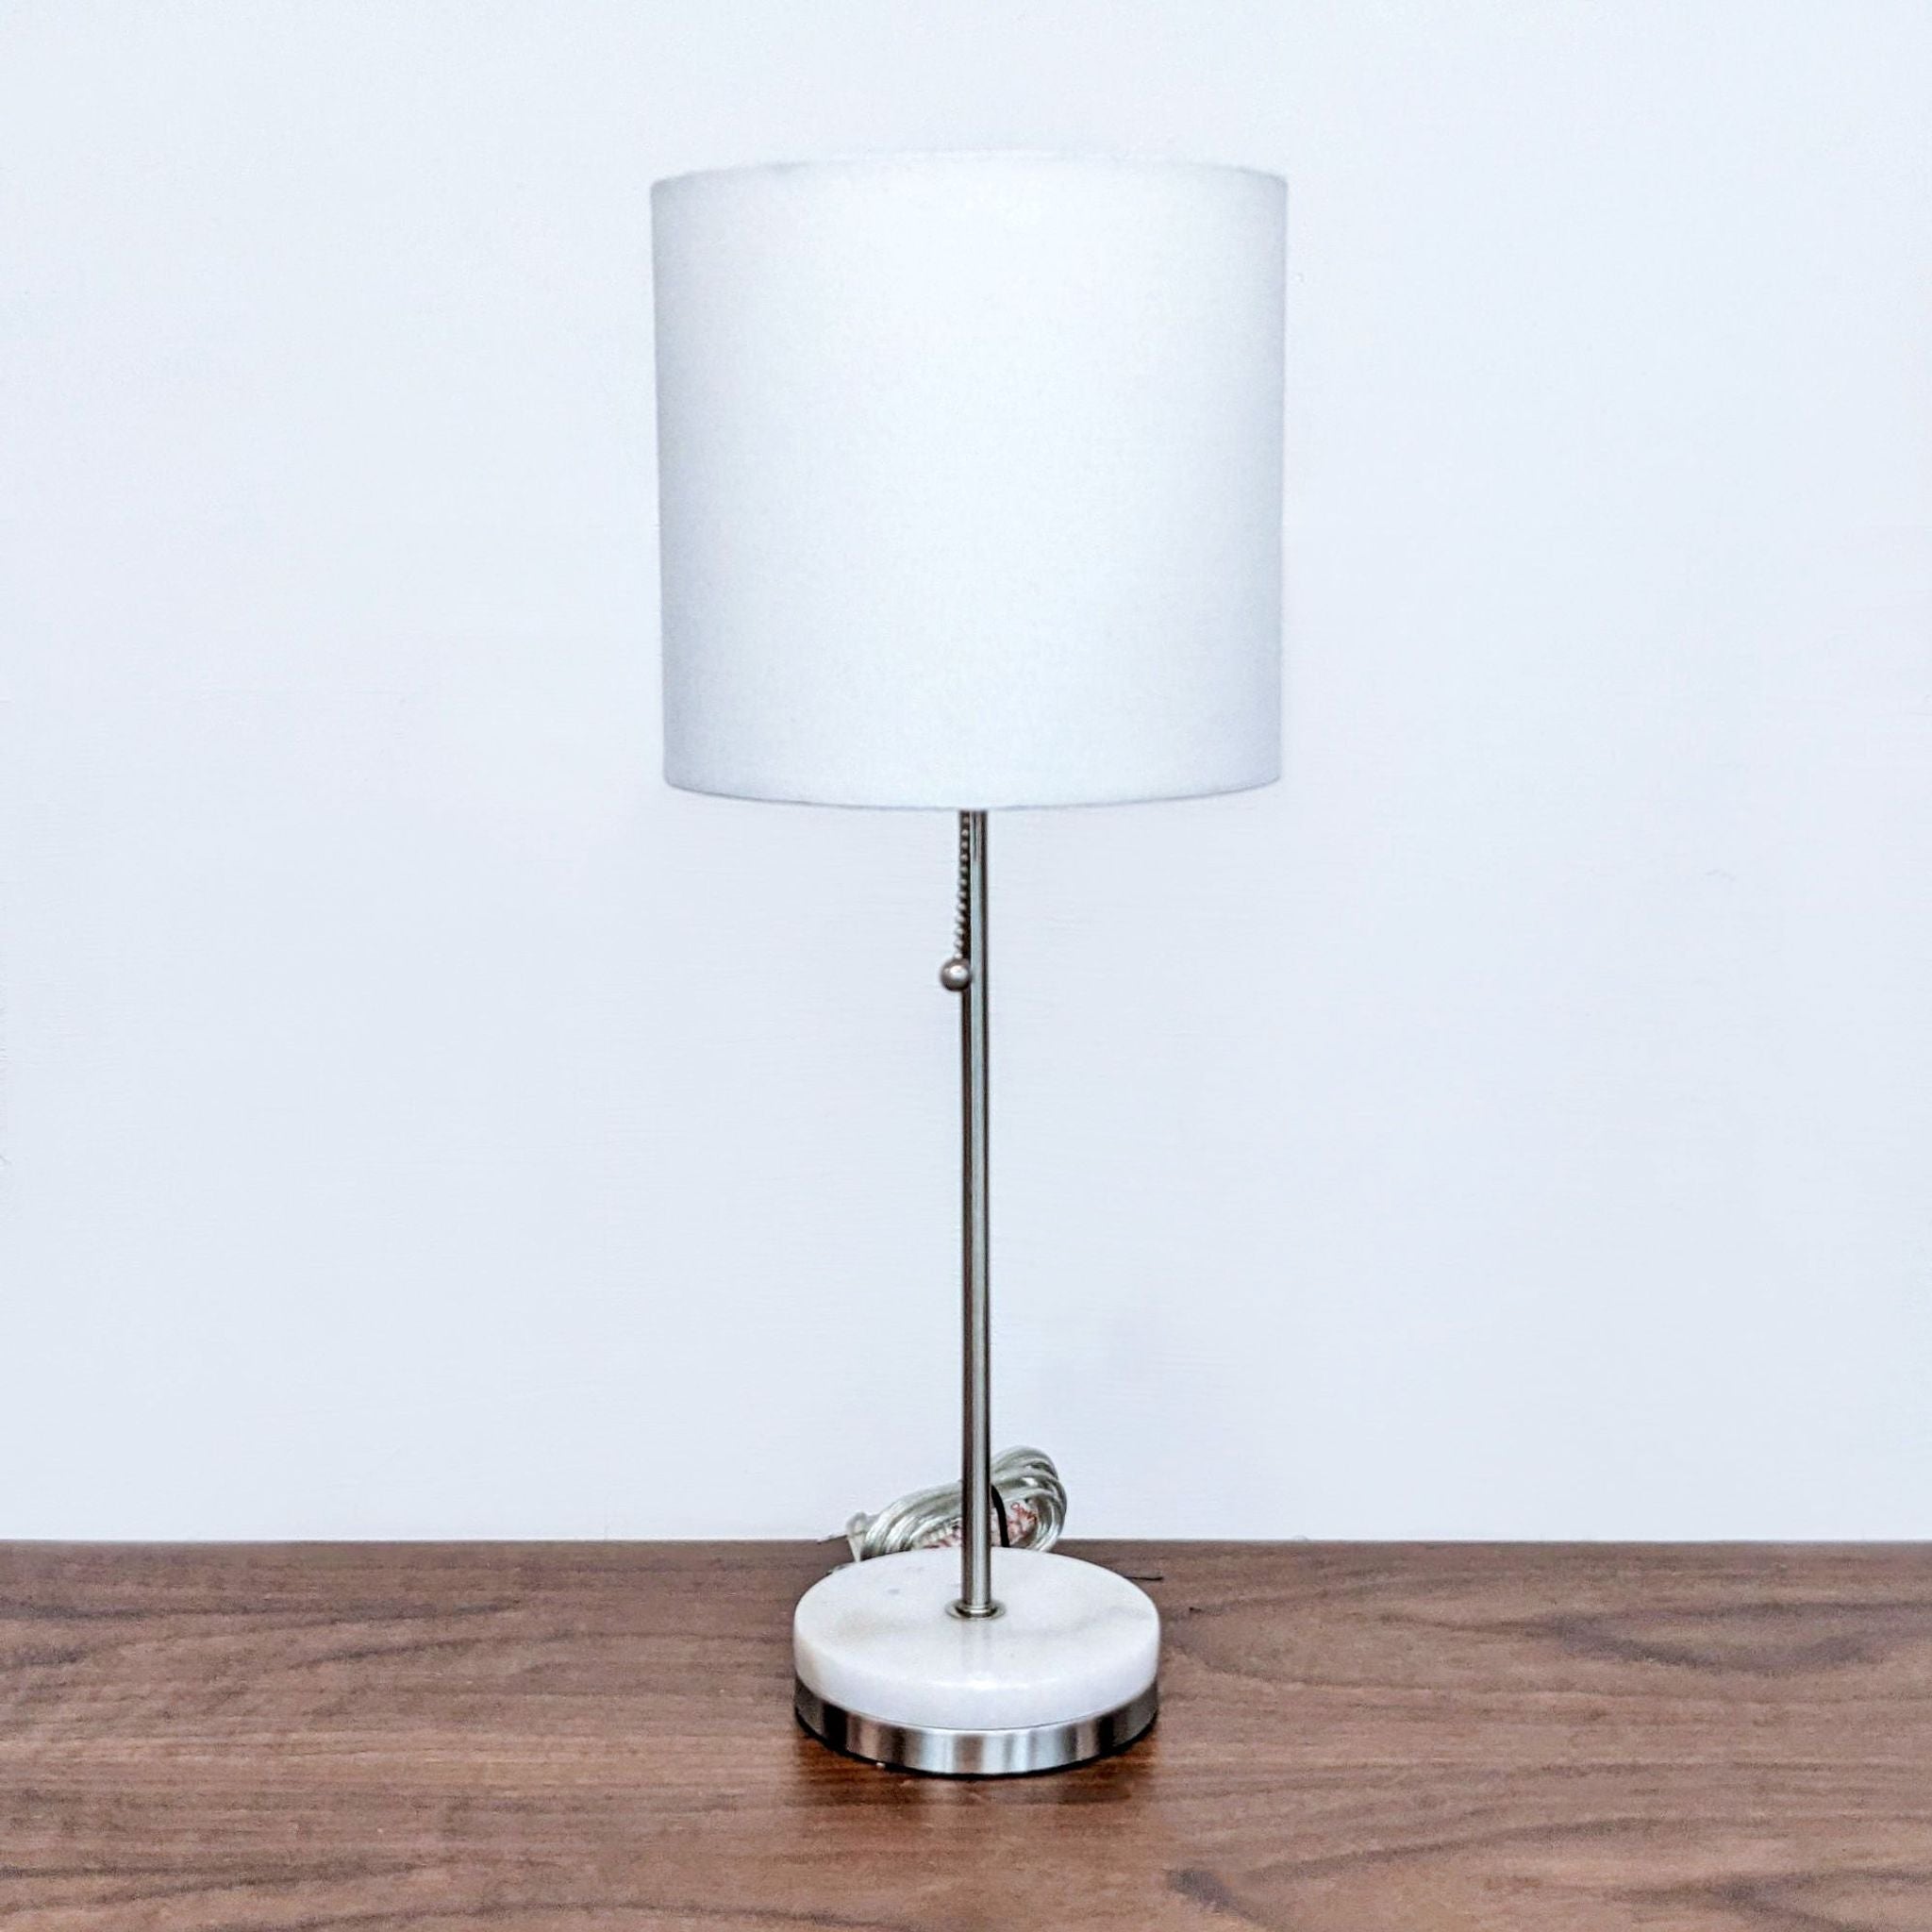 Alt text 1: Modern Reperch table lamp with cylindrical white shade and silver base on wooden surface against white wall. Max length 100.